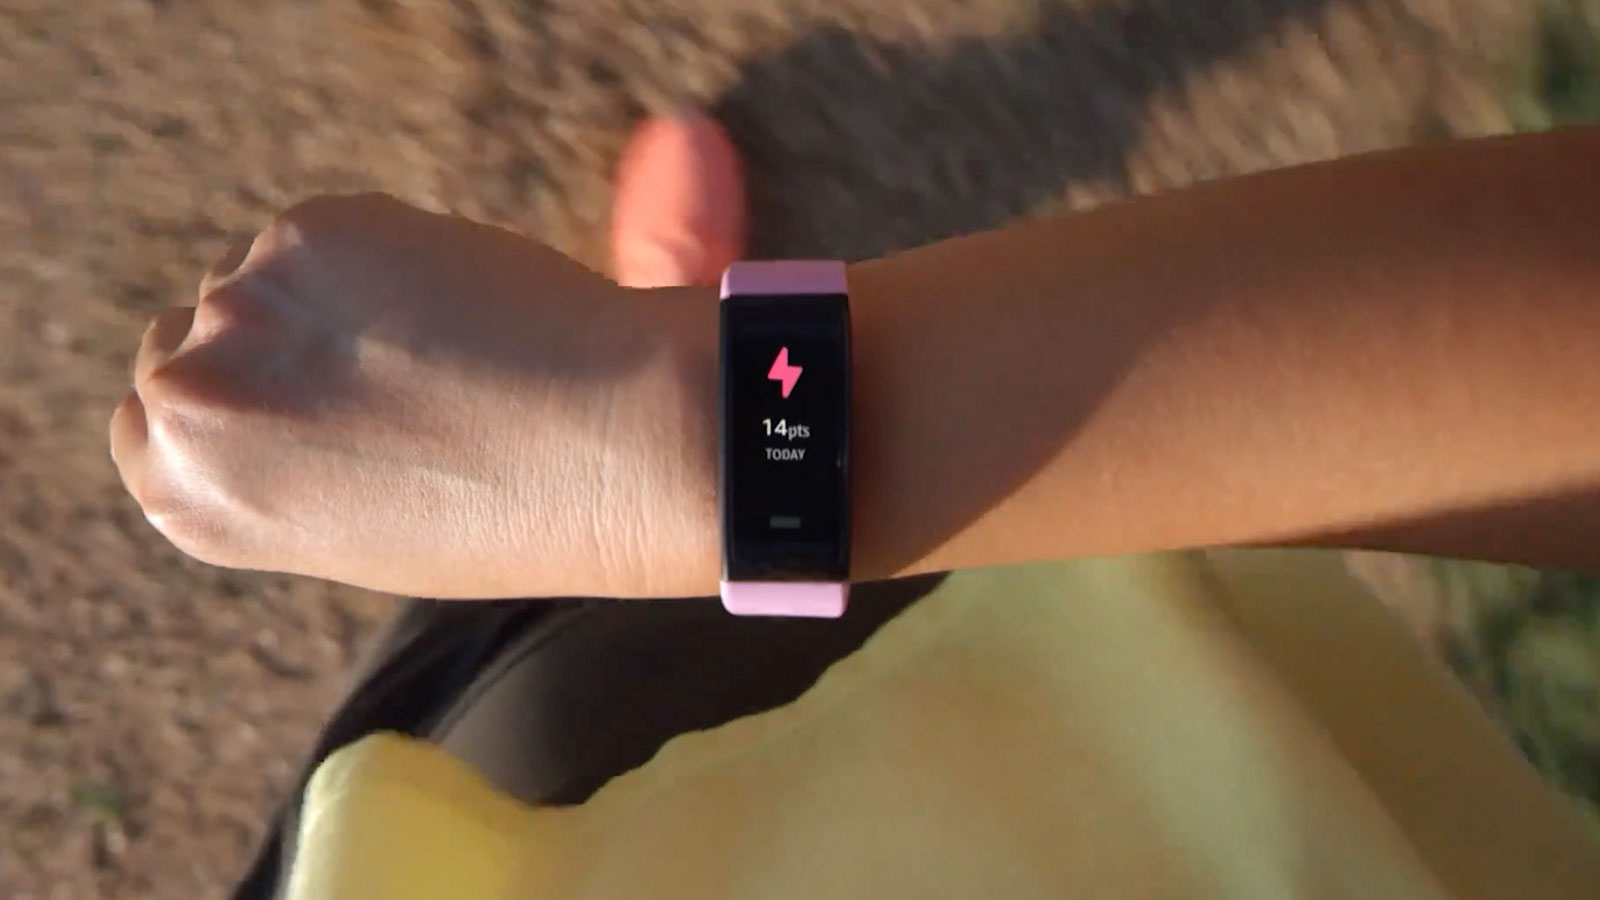 Amazon takes on Fitbit with the $80 Halo View | TechCrunch